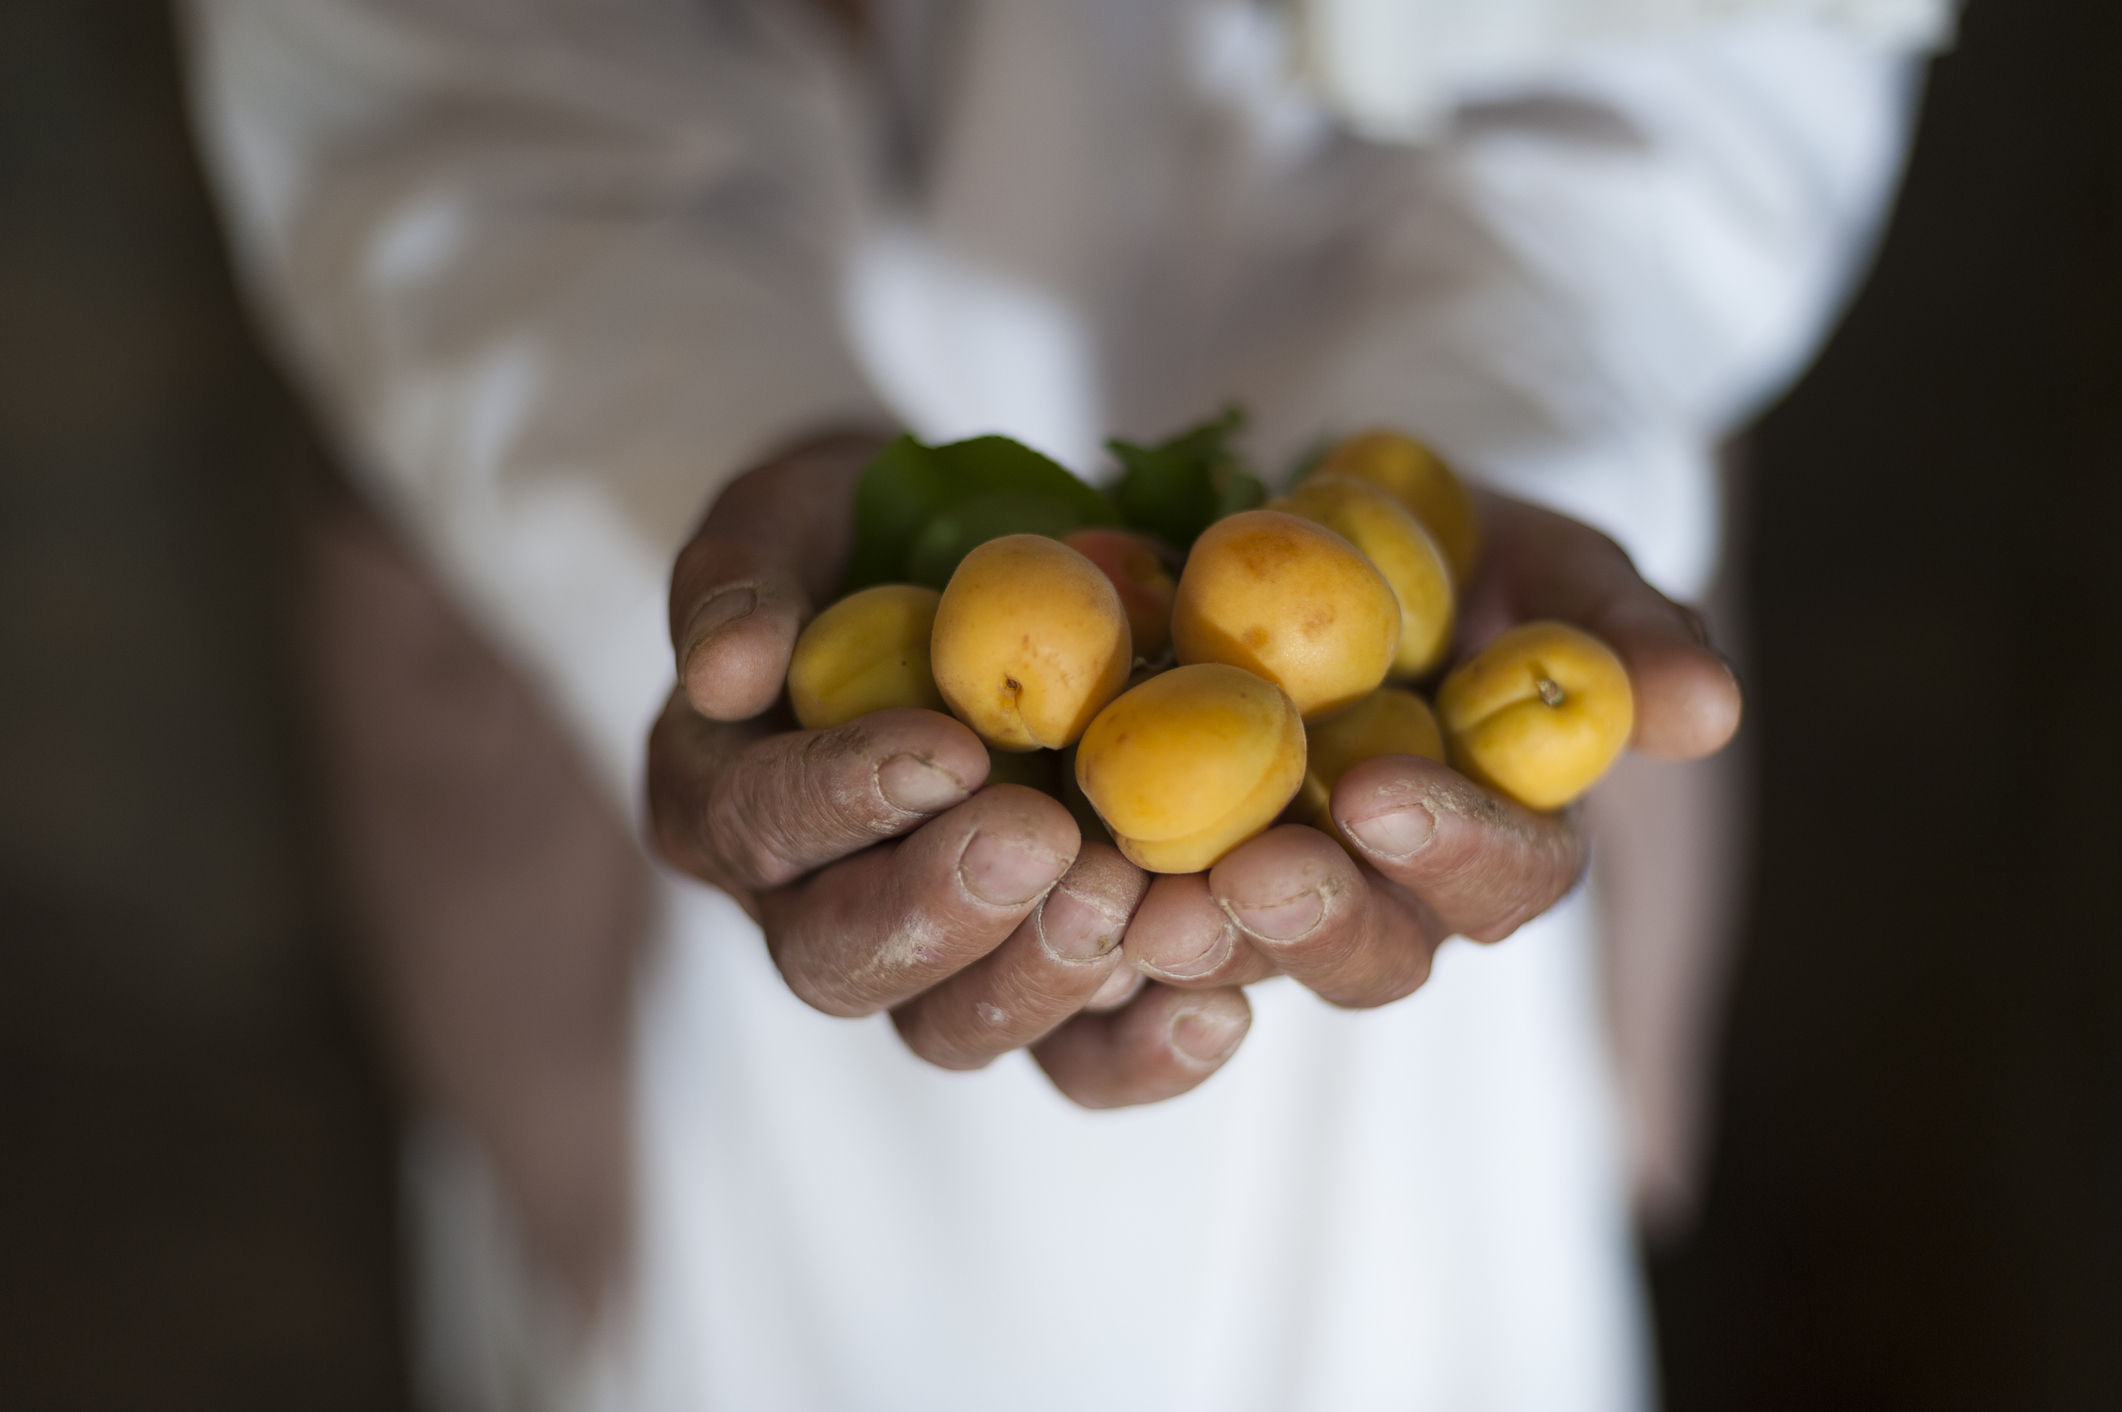 Hands of a man leaning with fruits in hand